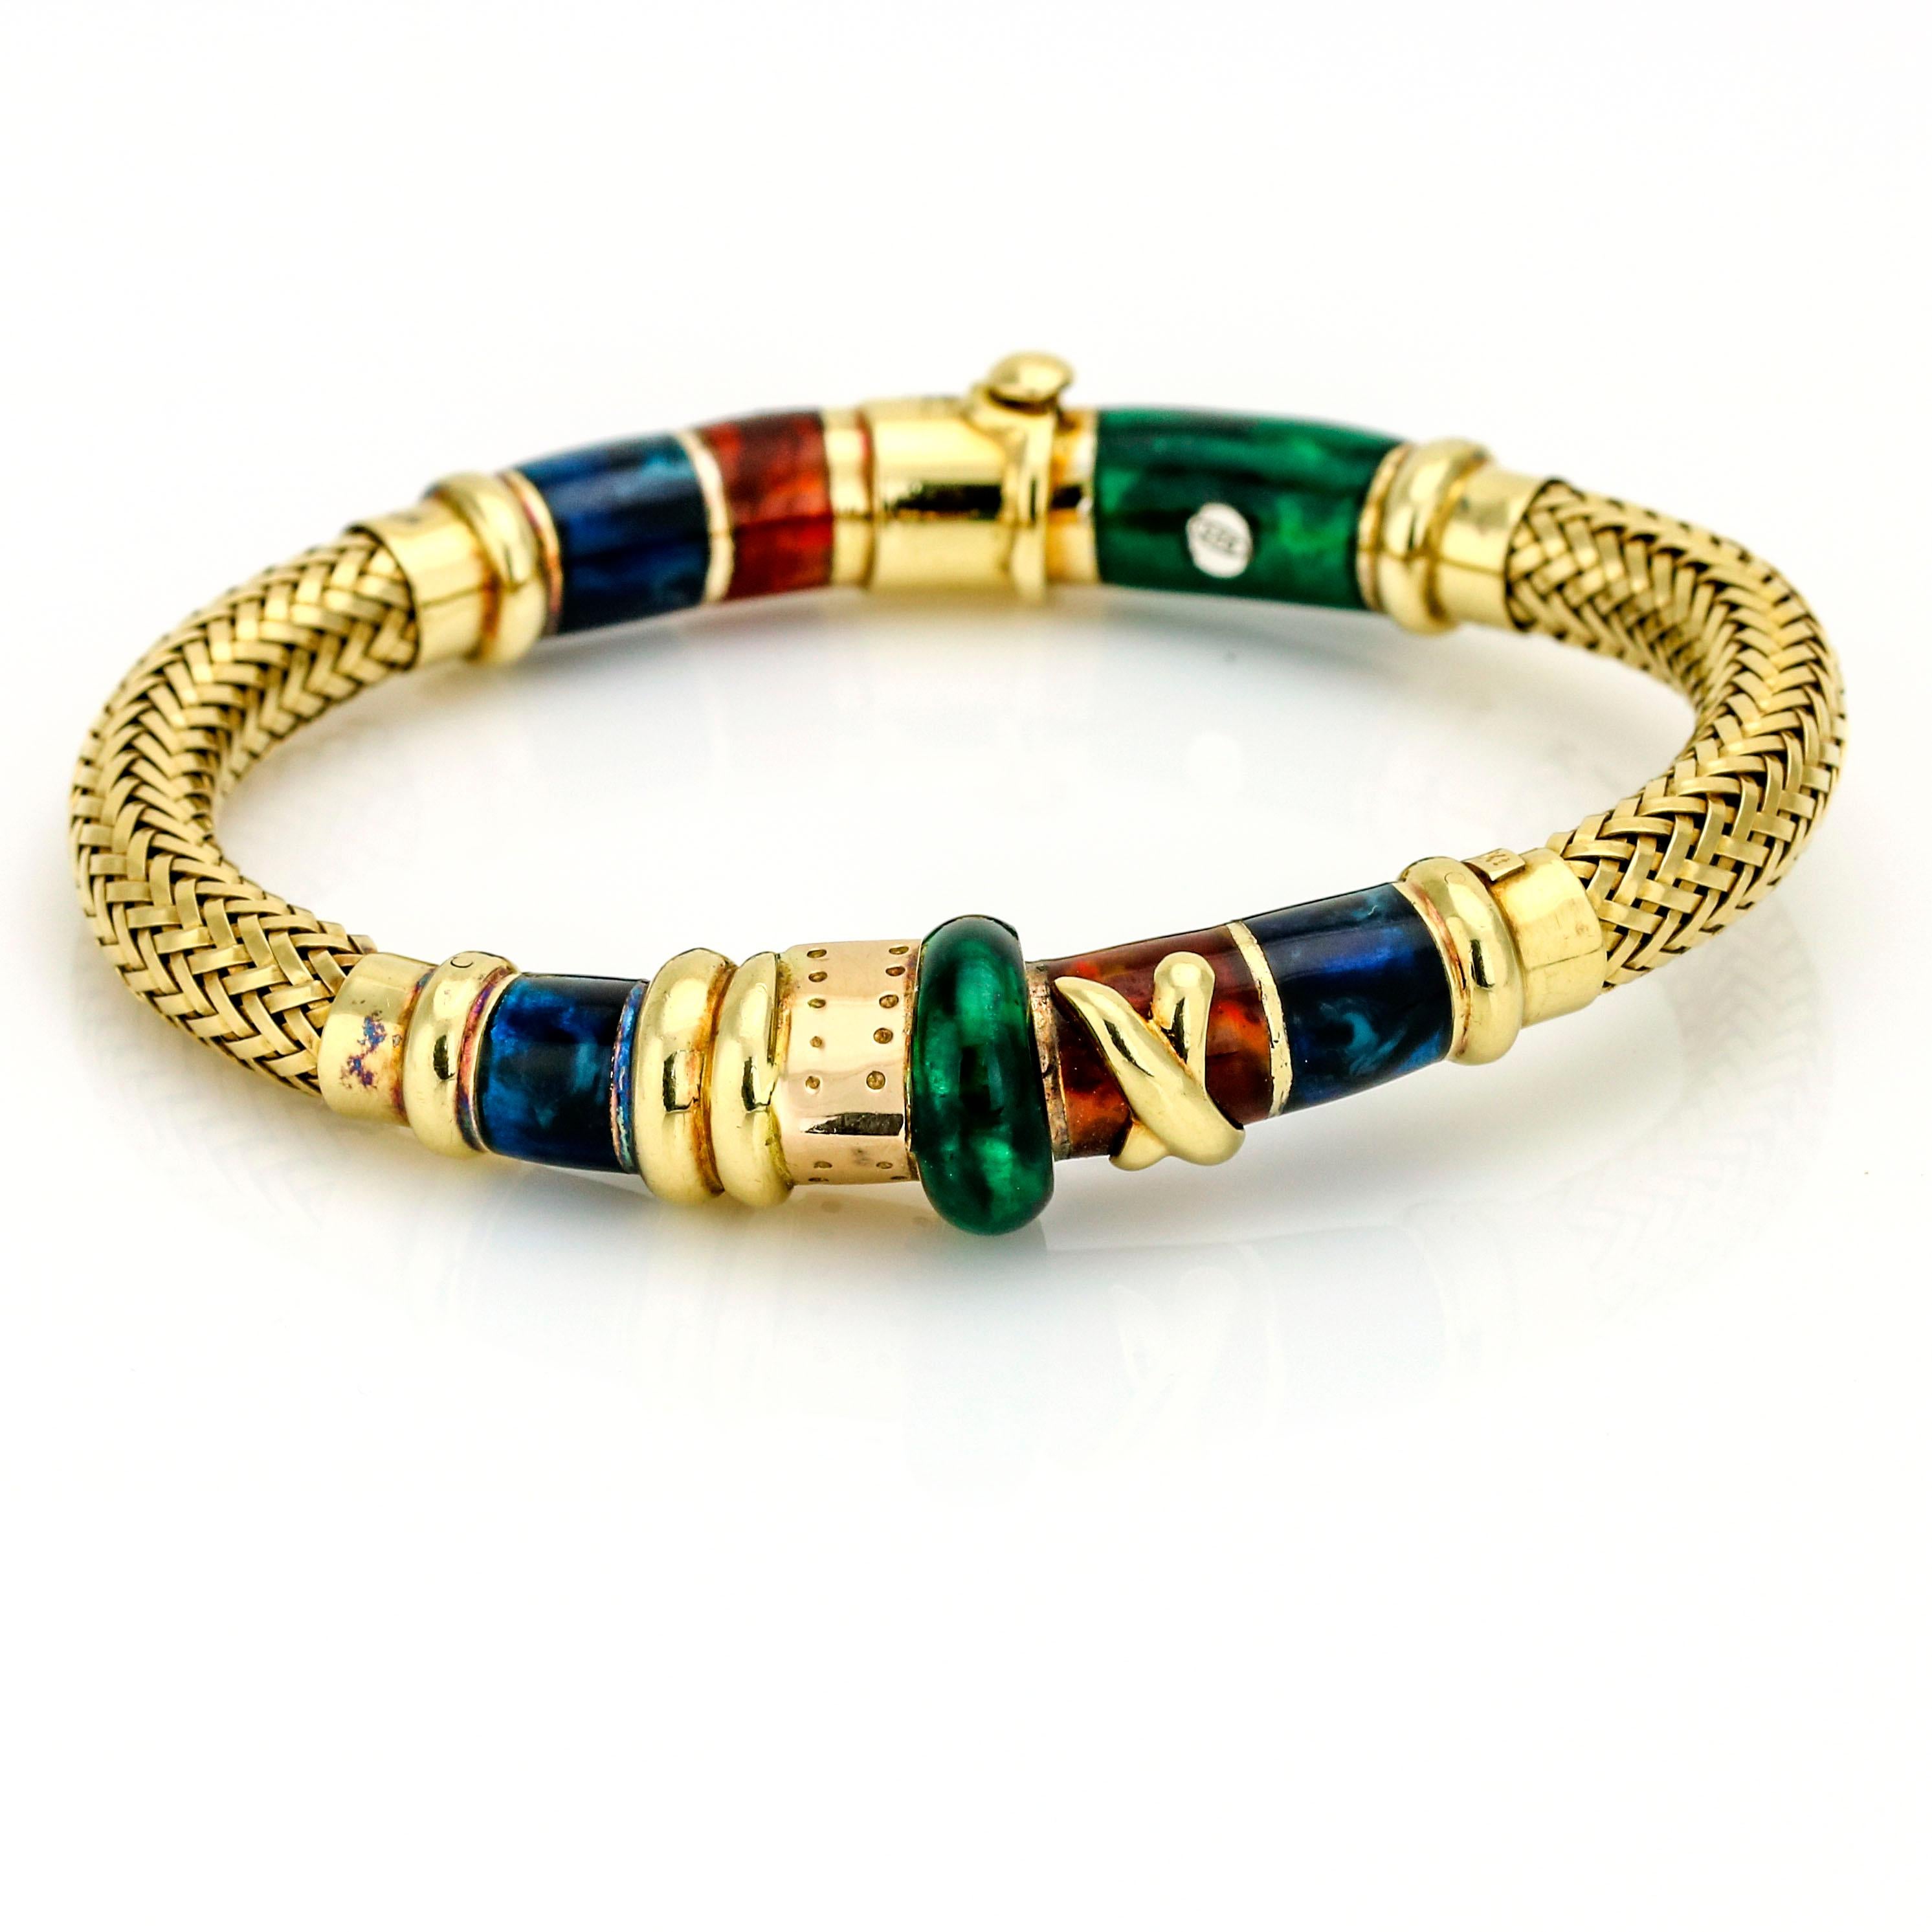 La Nouvelle Bague woven bangle bracelet crafted in 18-karat yellow gold and sterling silver with enamel details. Made in Italy. Slide push clasp.

Size, Small (fits a wrist up to 6 inches)